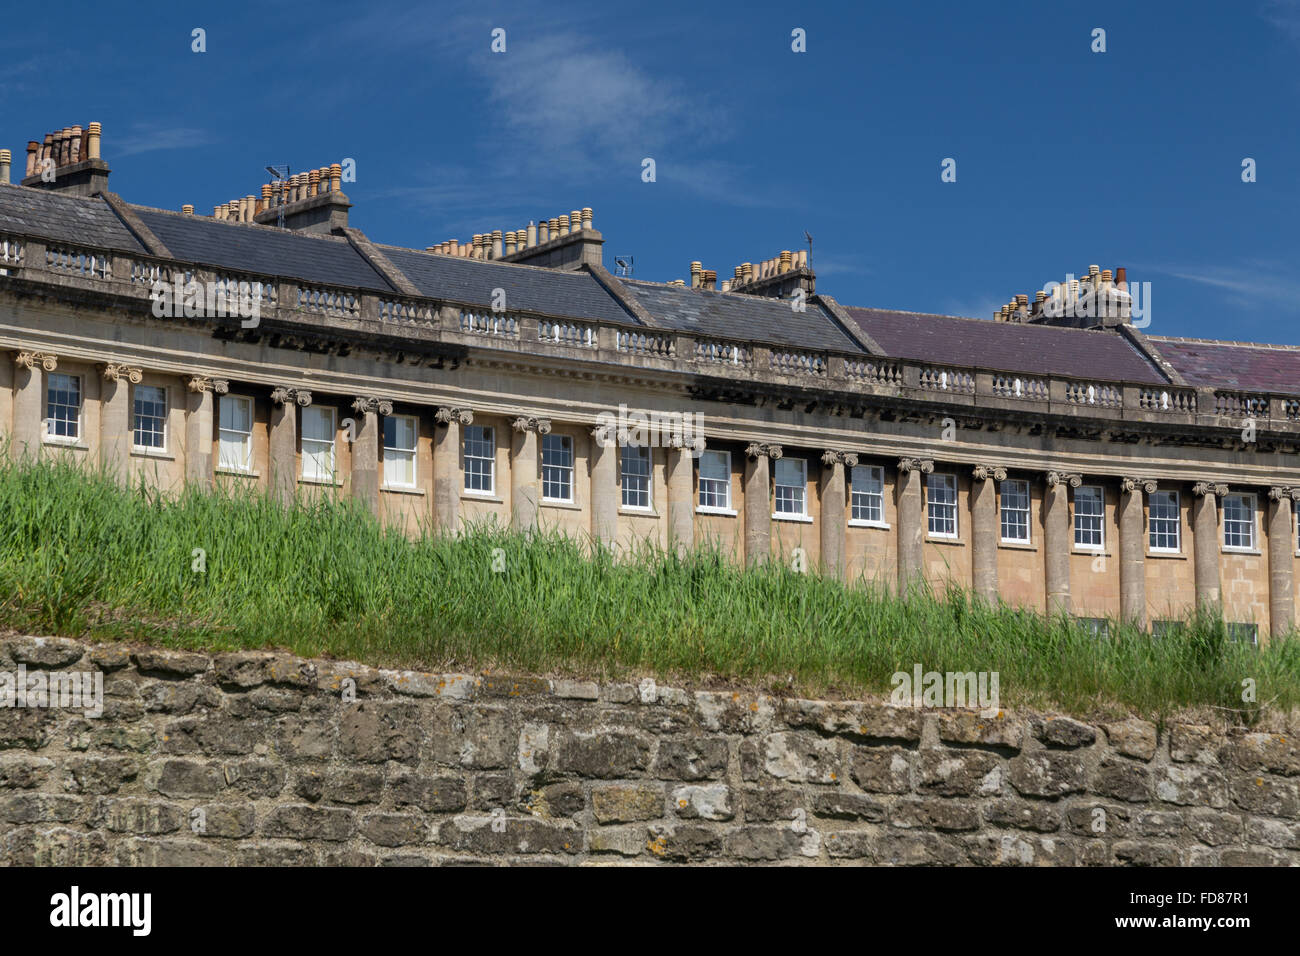 The Royal Crescent, The City of Bath, Roman World Heritage Site, Somerset, BANES, UK Stock Photo